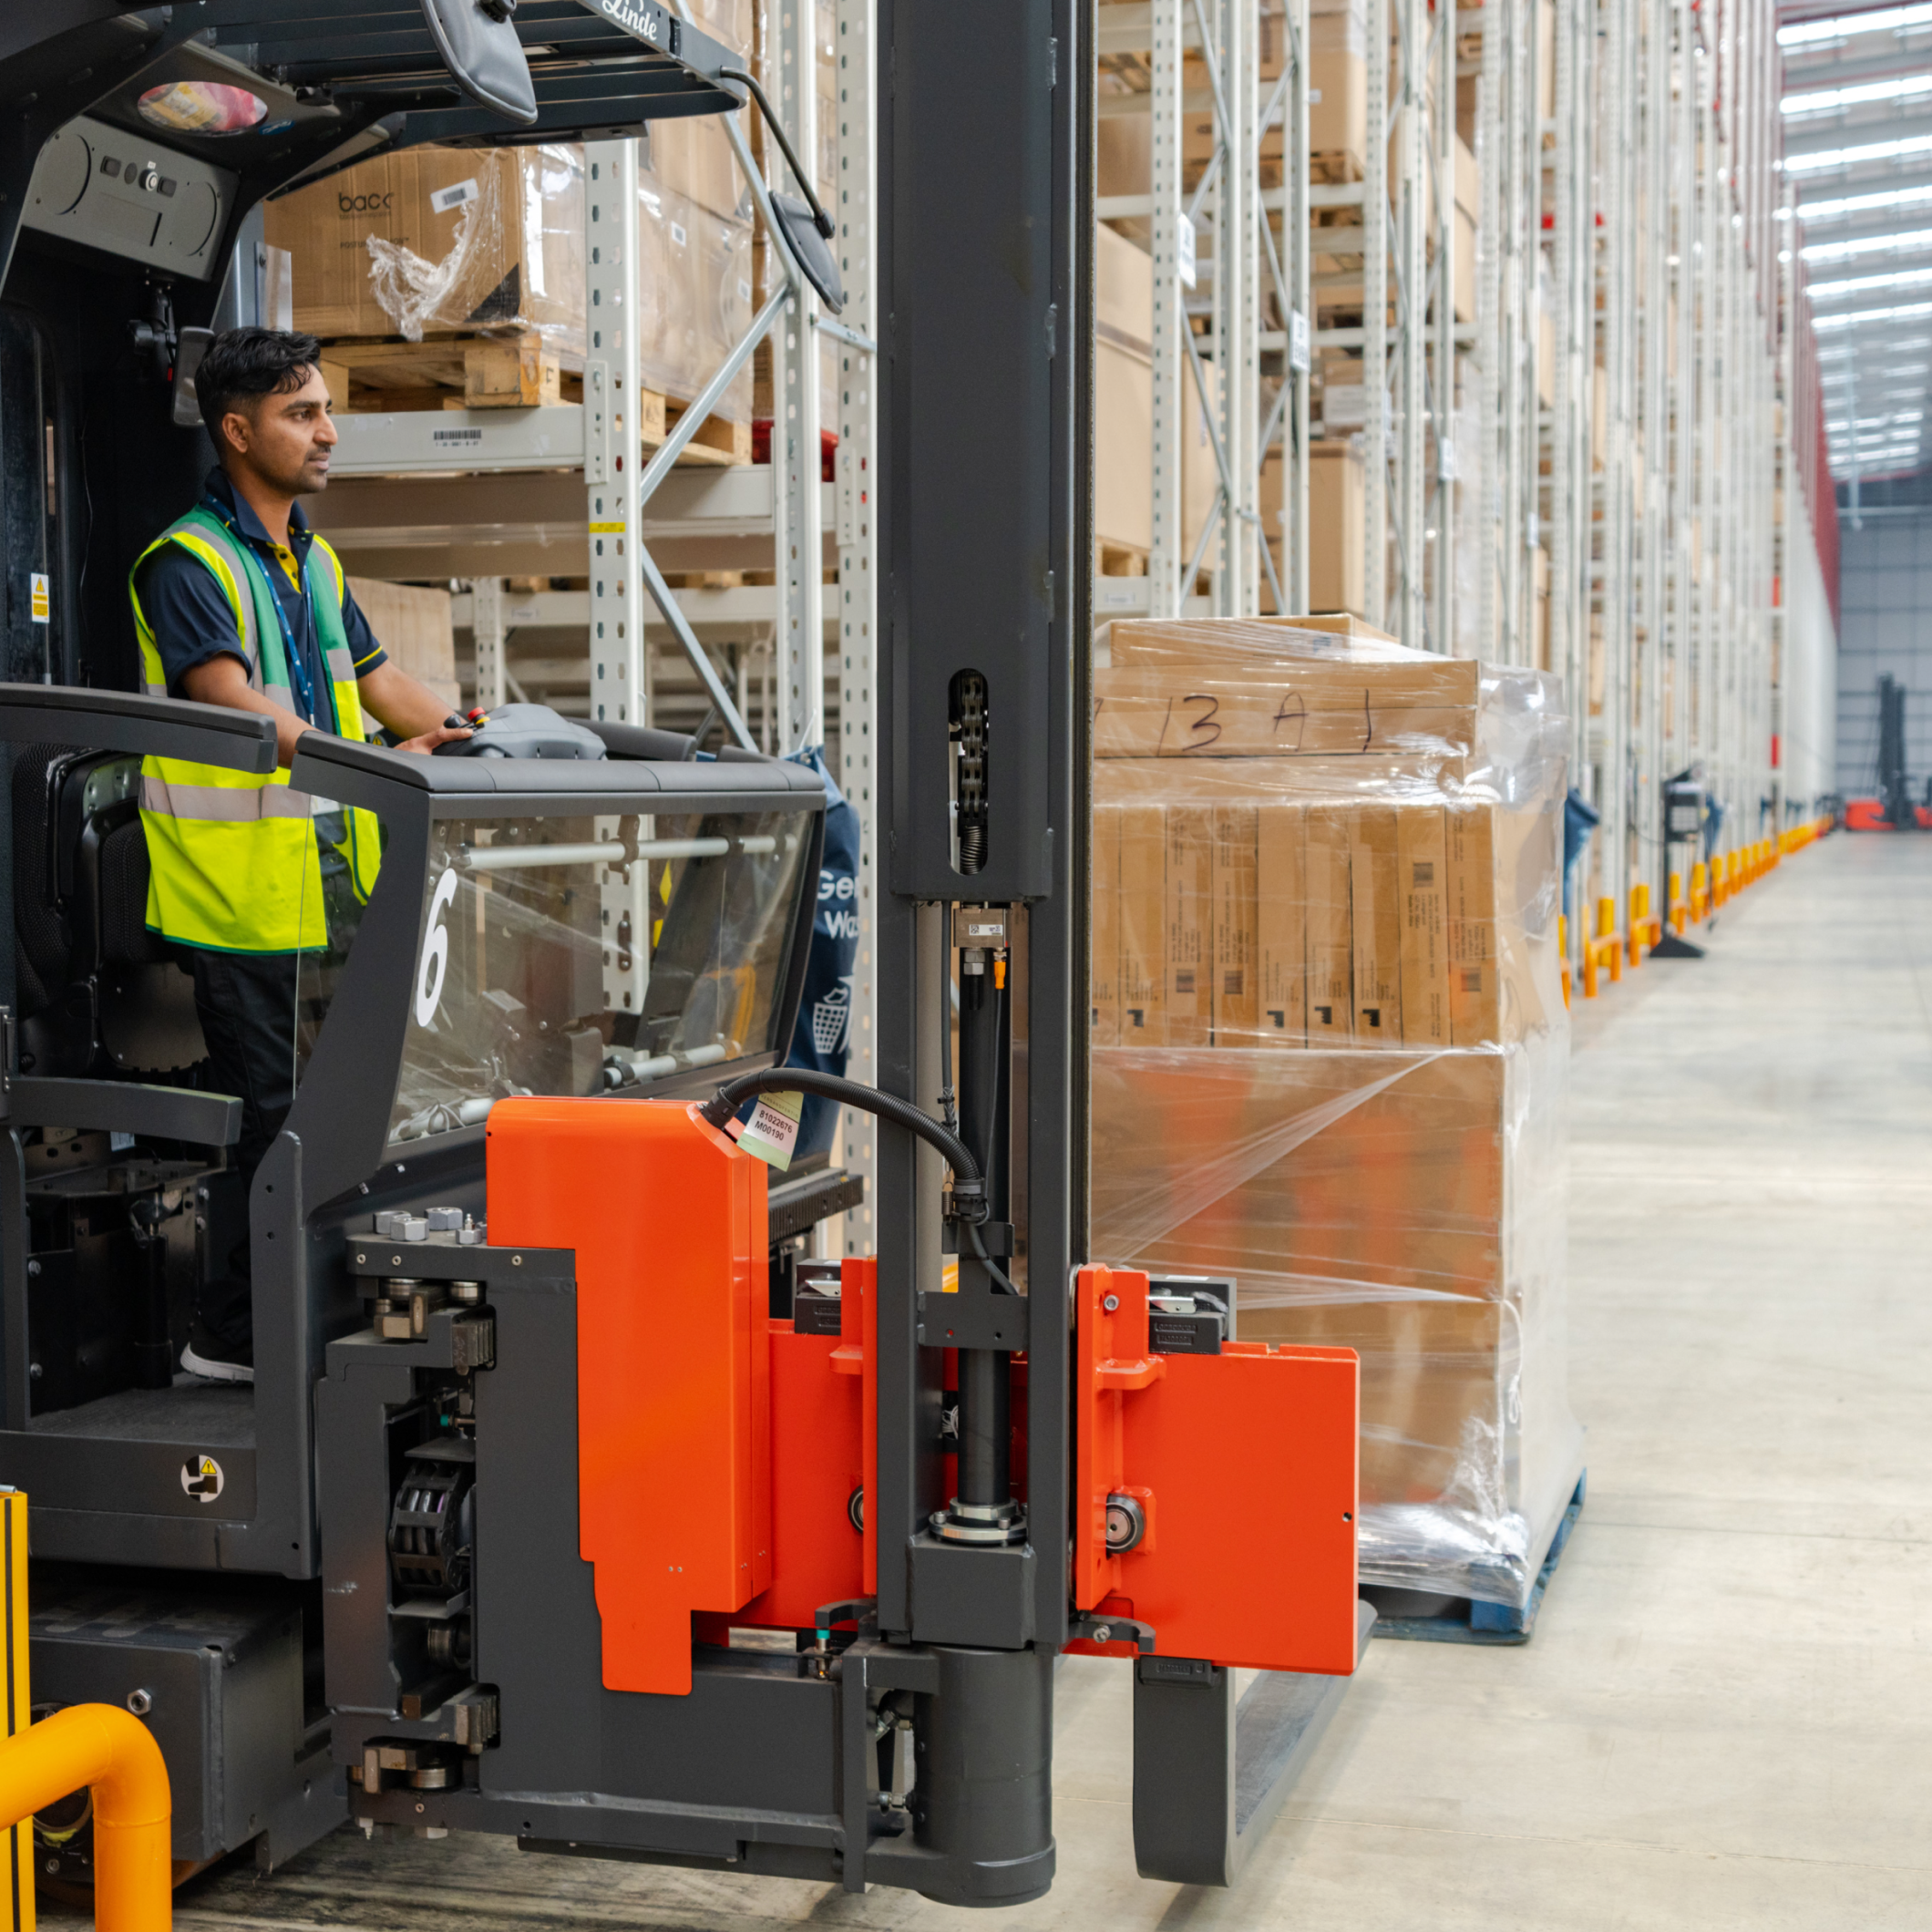 Man on forklift truck in warehouse